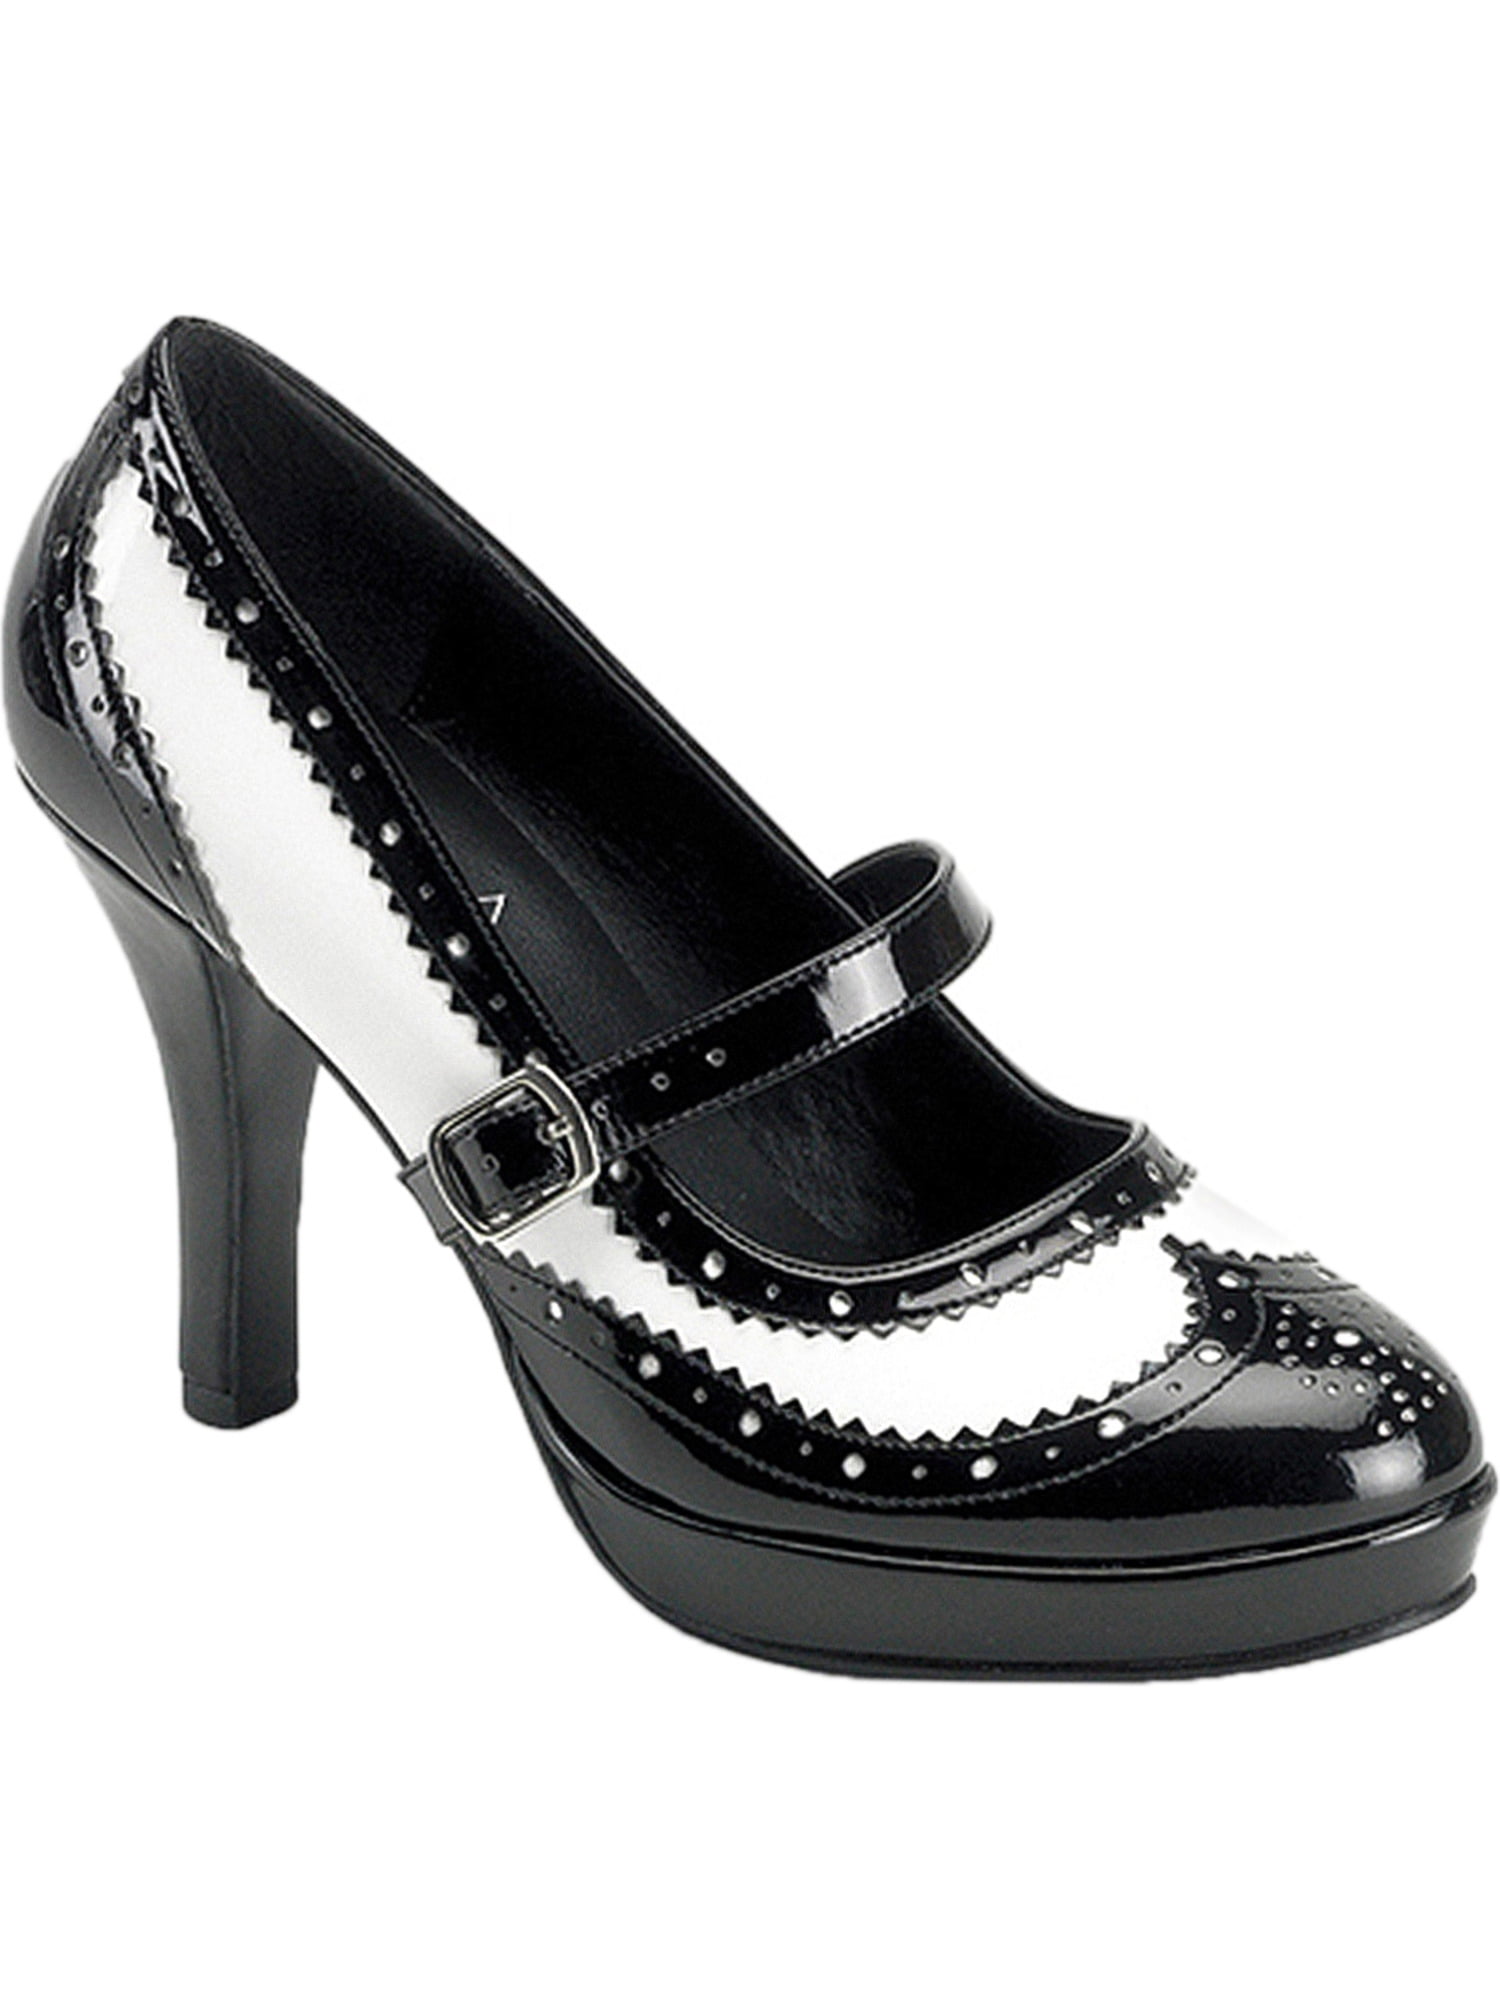 black and white shoes ladies heels